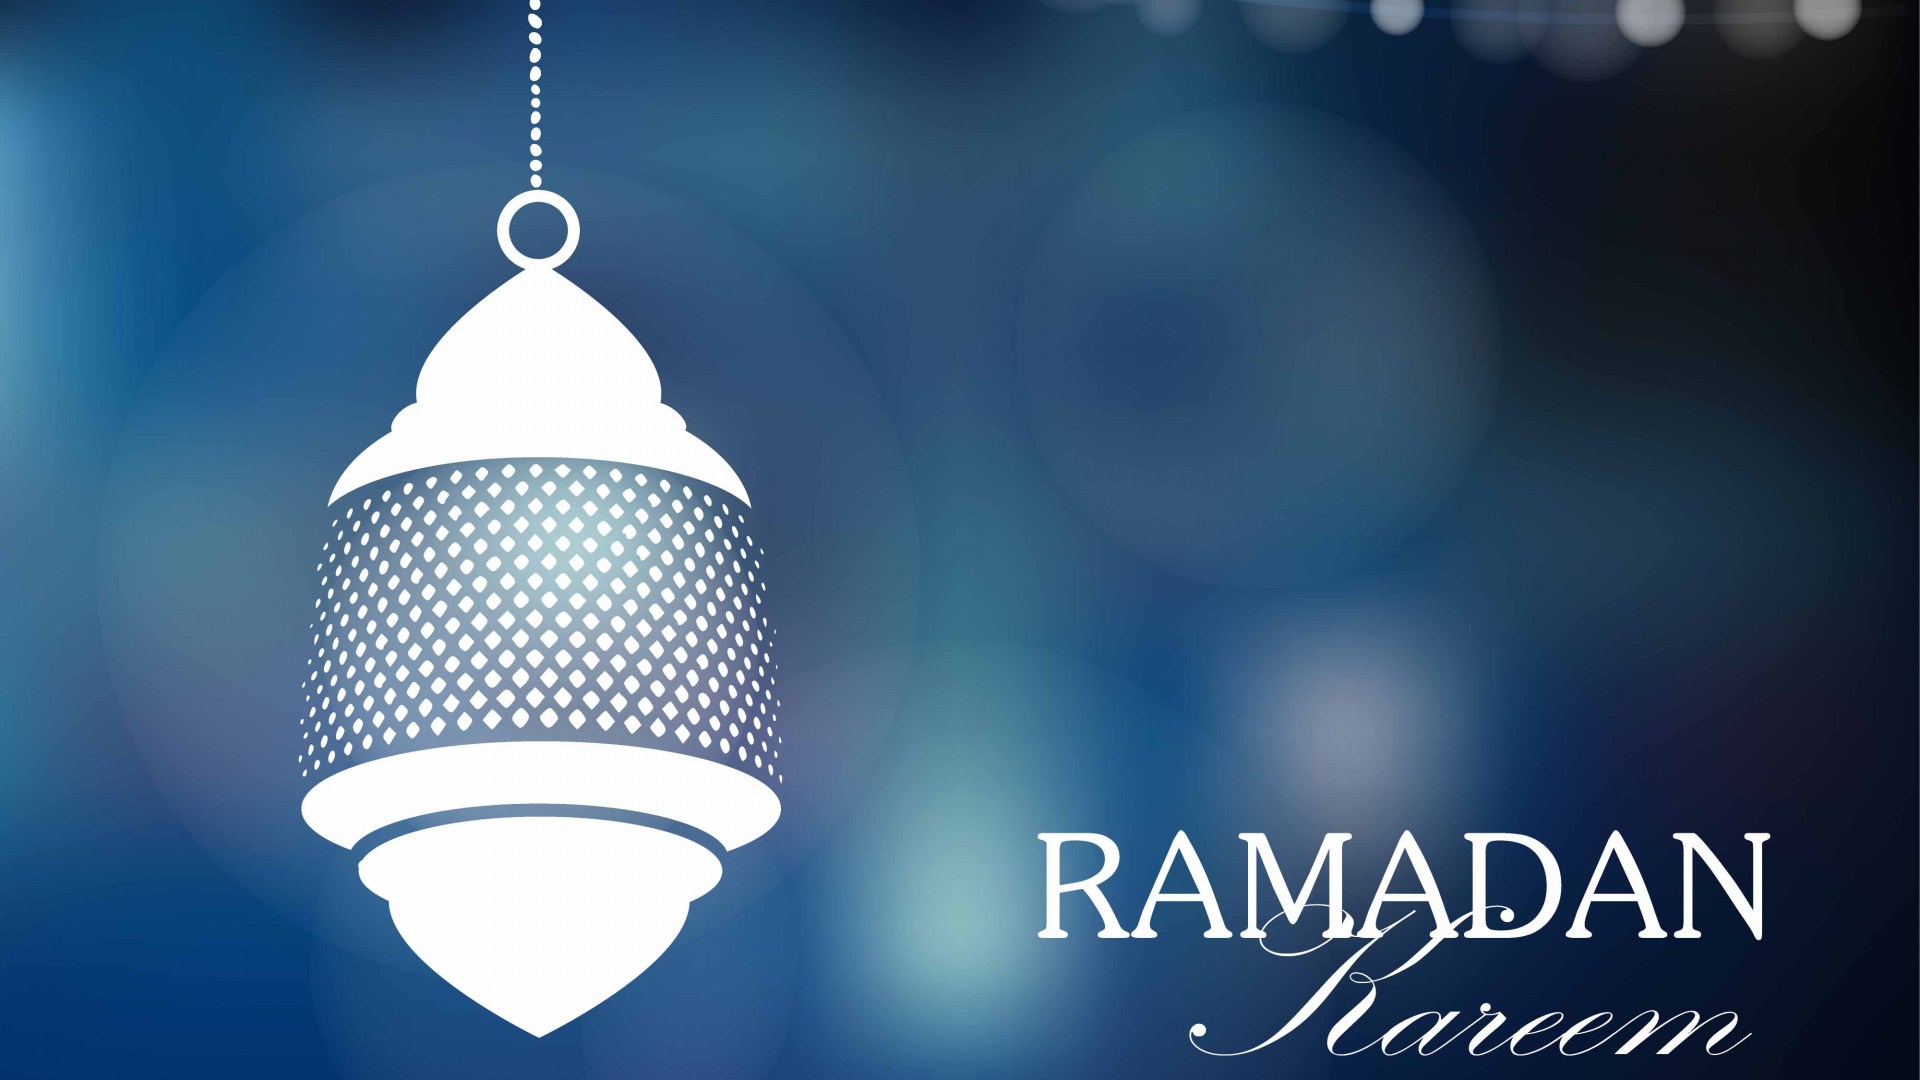 Ramadan Pictures And Wallpapers Collection - Ramadan Kareem Wallpapers Hd , HD Wallpaper & Backgrounds